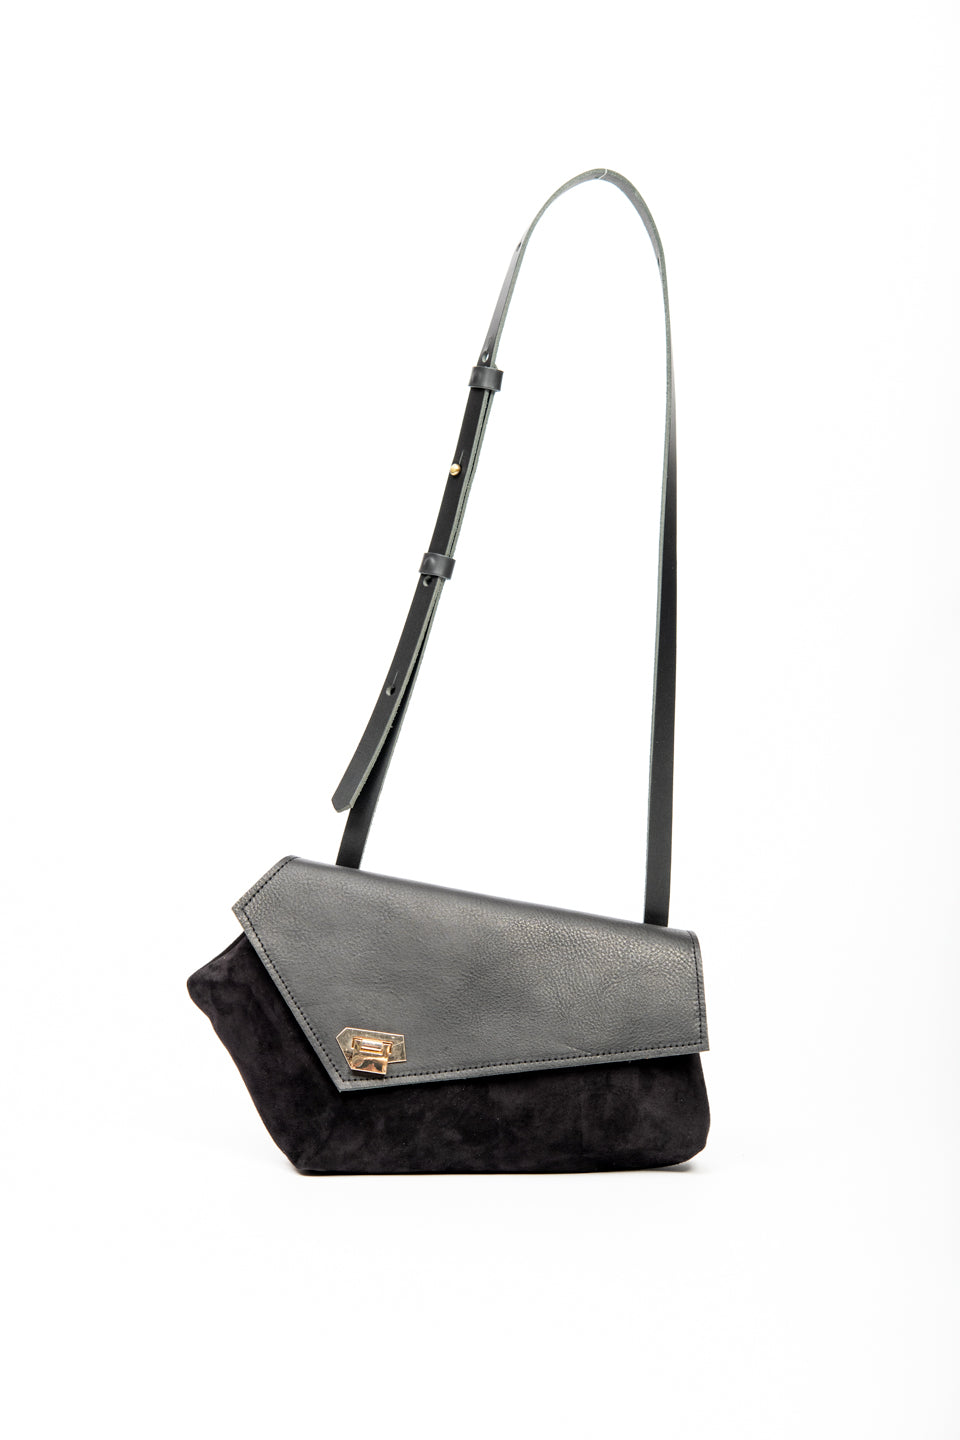 Five-sided polygon handbag PENTAGONO model from the Variable Geometry collection